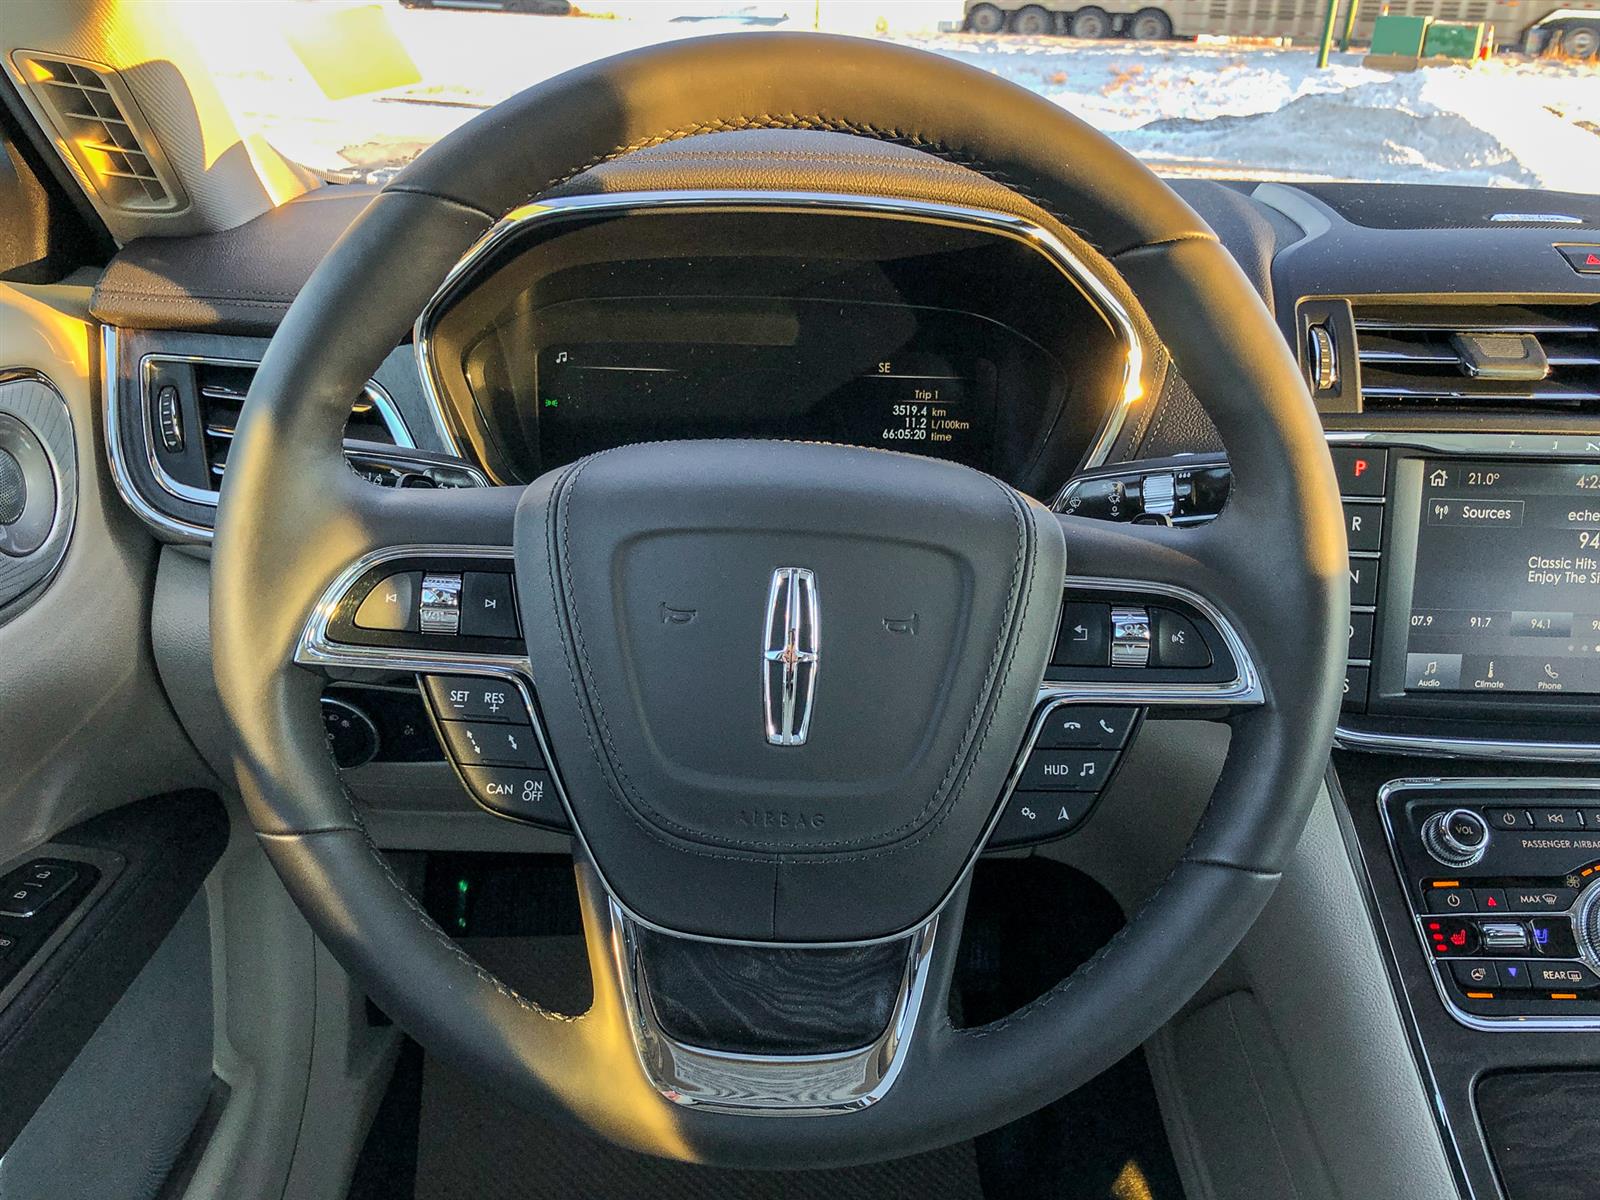 2020 Lincoln Continental RESERVE | 3.0L TURBO V6 | AWD | 360-DEGREE CAMERA | FULLY-LOADED